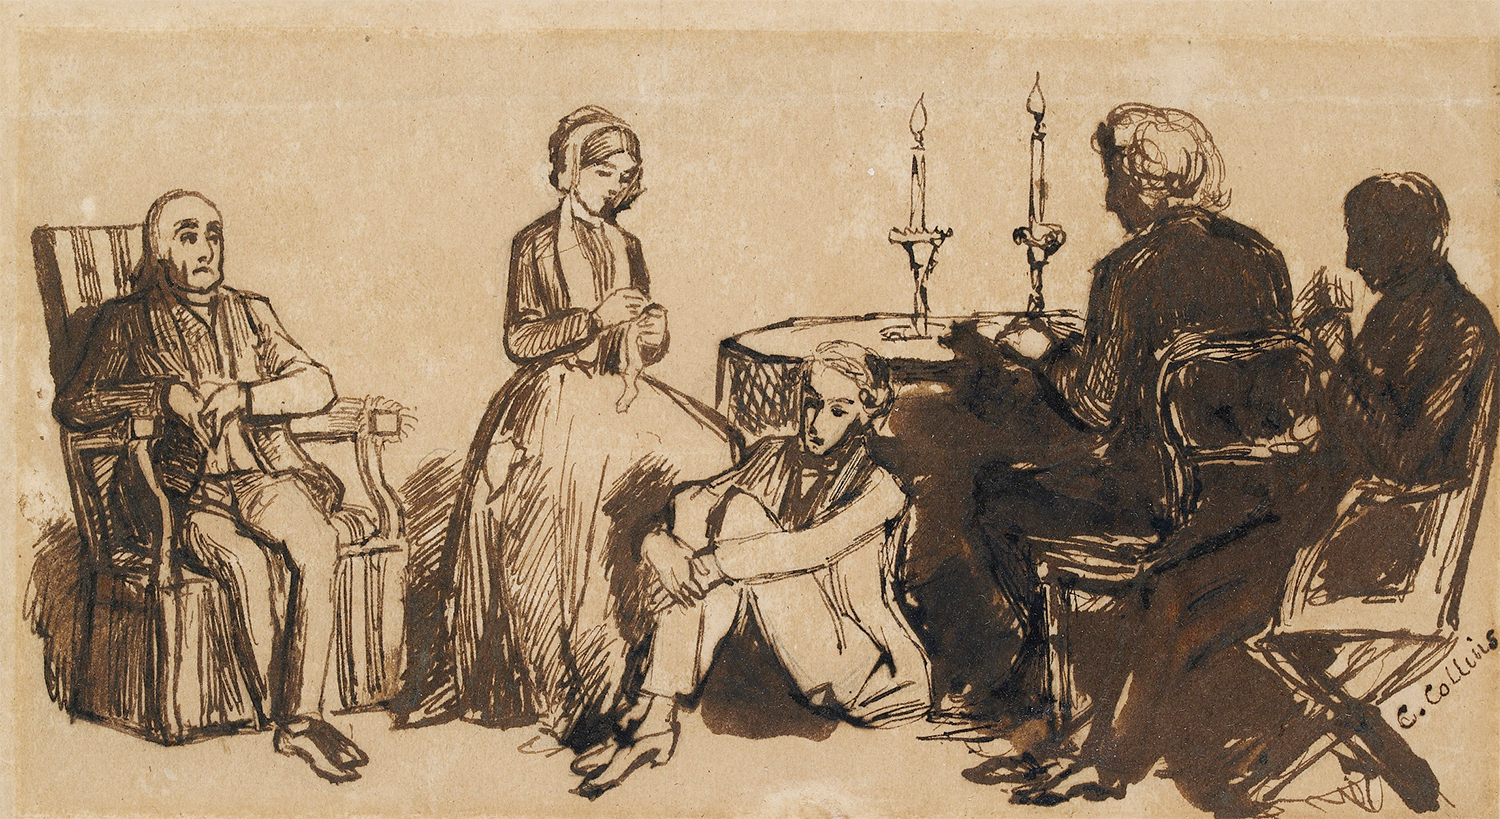 Pen and brown ink sketch on pale brown paper of a casual evening gathering at the Combes' house in Oxford by Charles Alston Collins, 1850-1851. It depicts William Bennett; Martha Combe, Thomas Combe; Charles Alston Collins and John Everett Millais